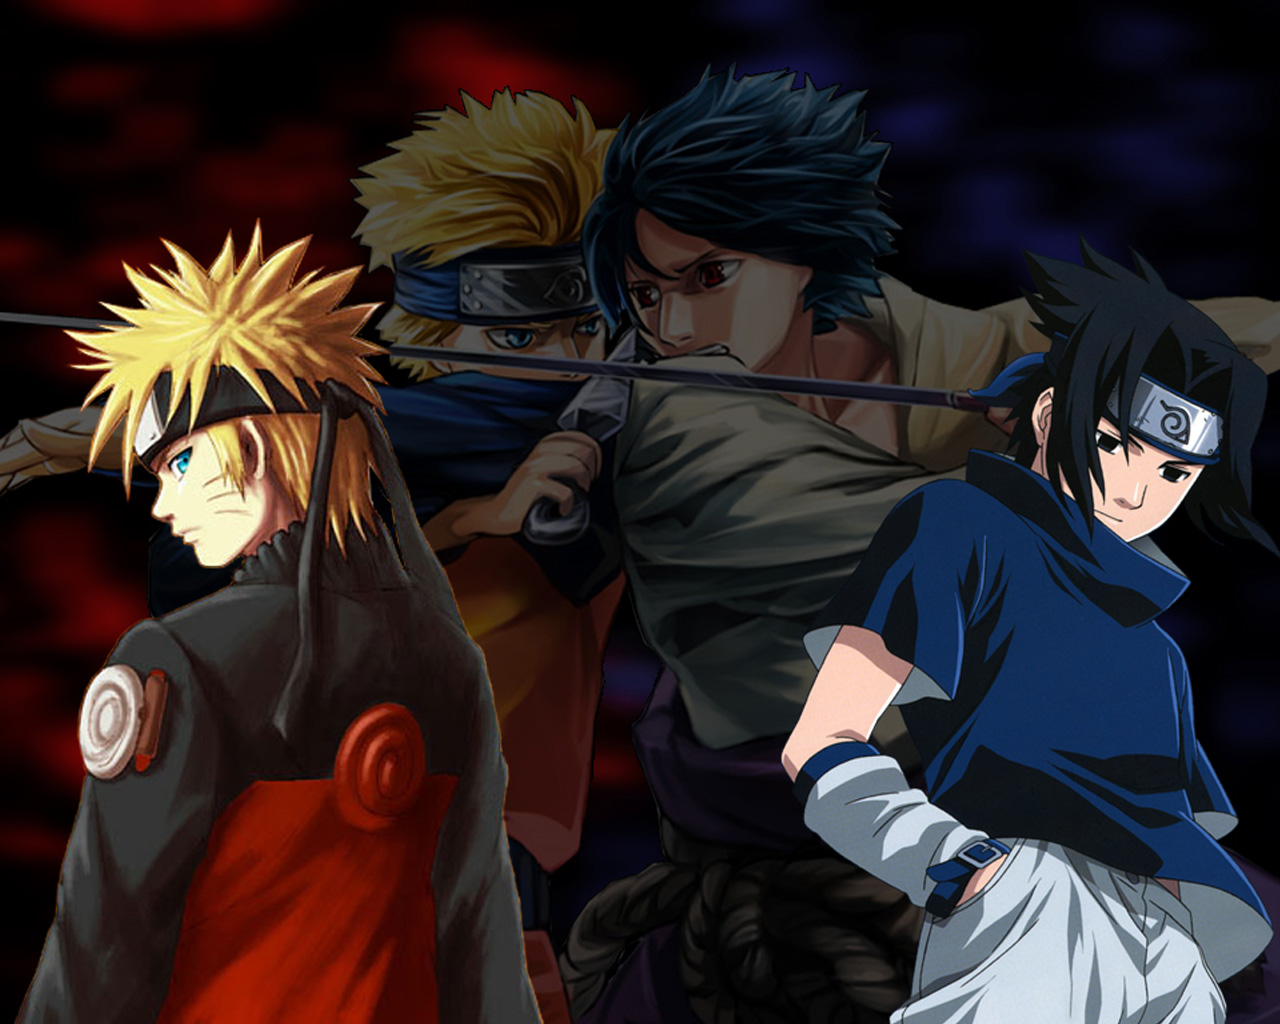 Fight Anime Wallpapers HD: Naruto Wallpapers HD Free HD Wallpapers ...